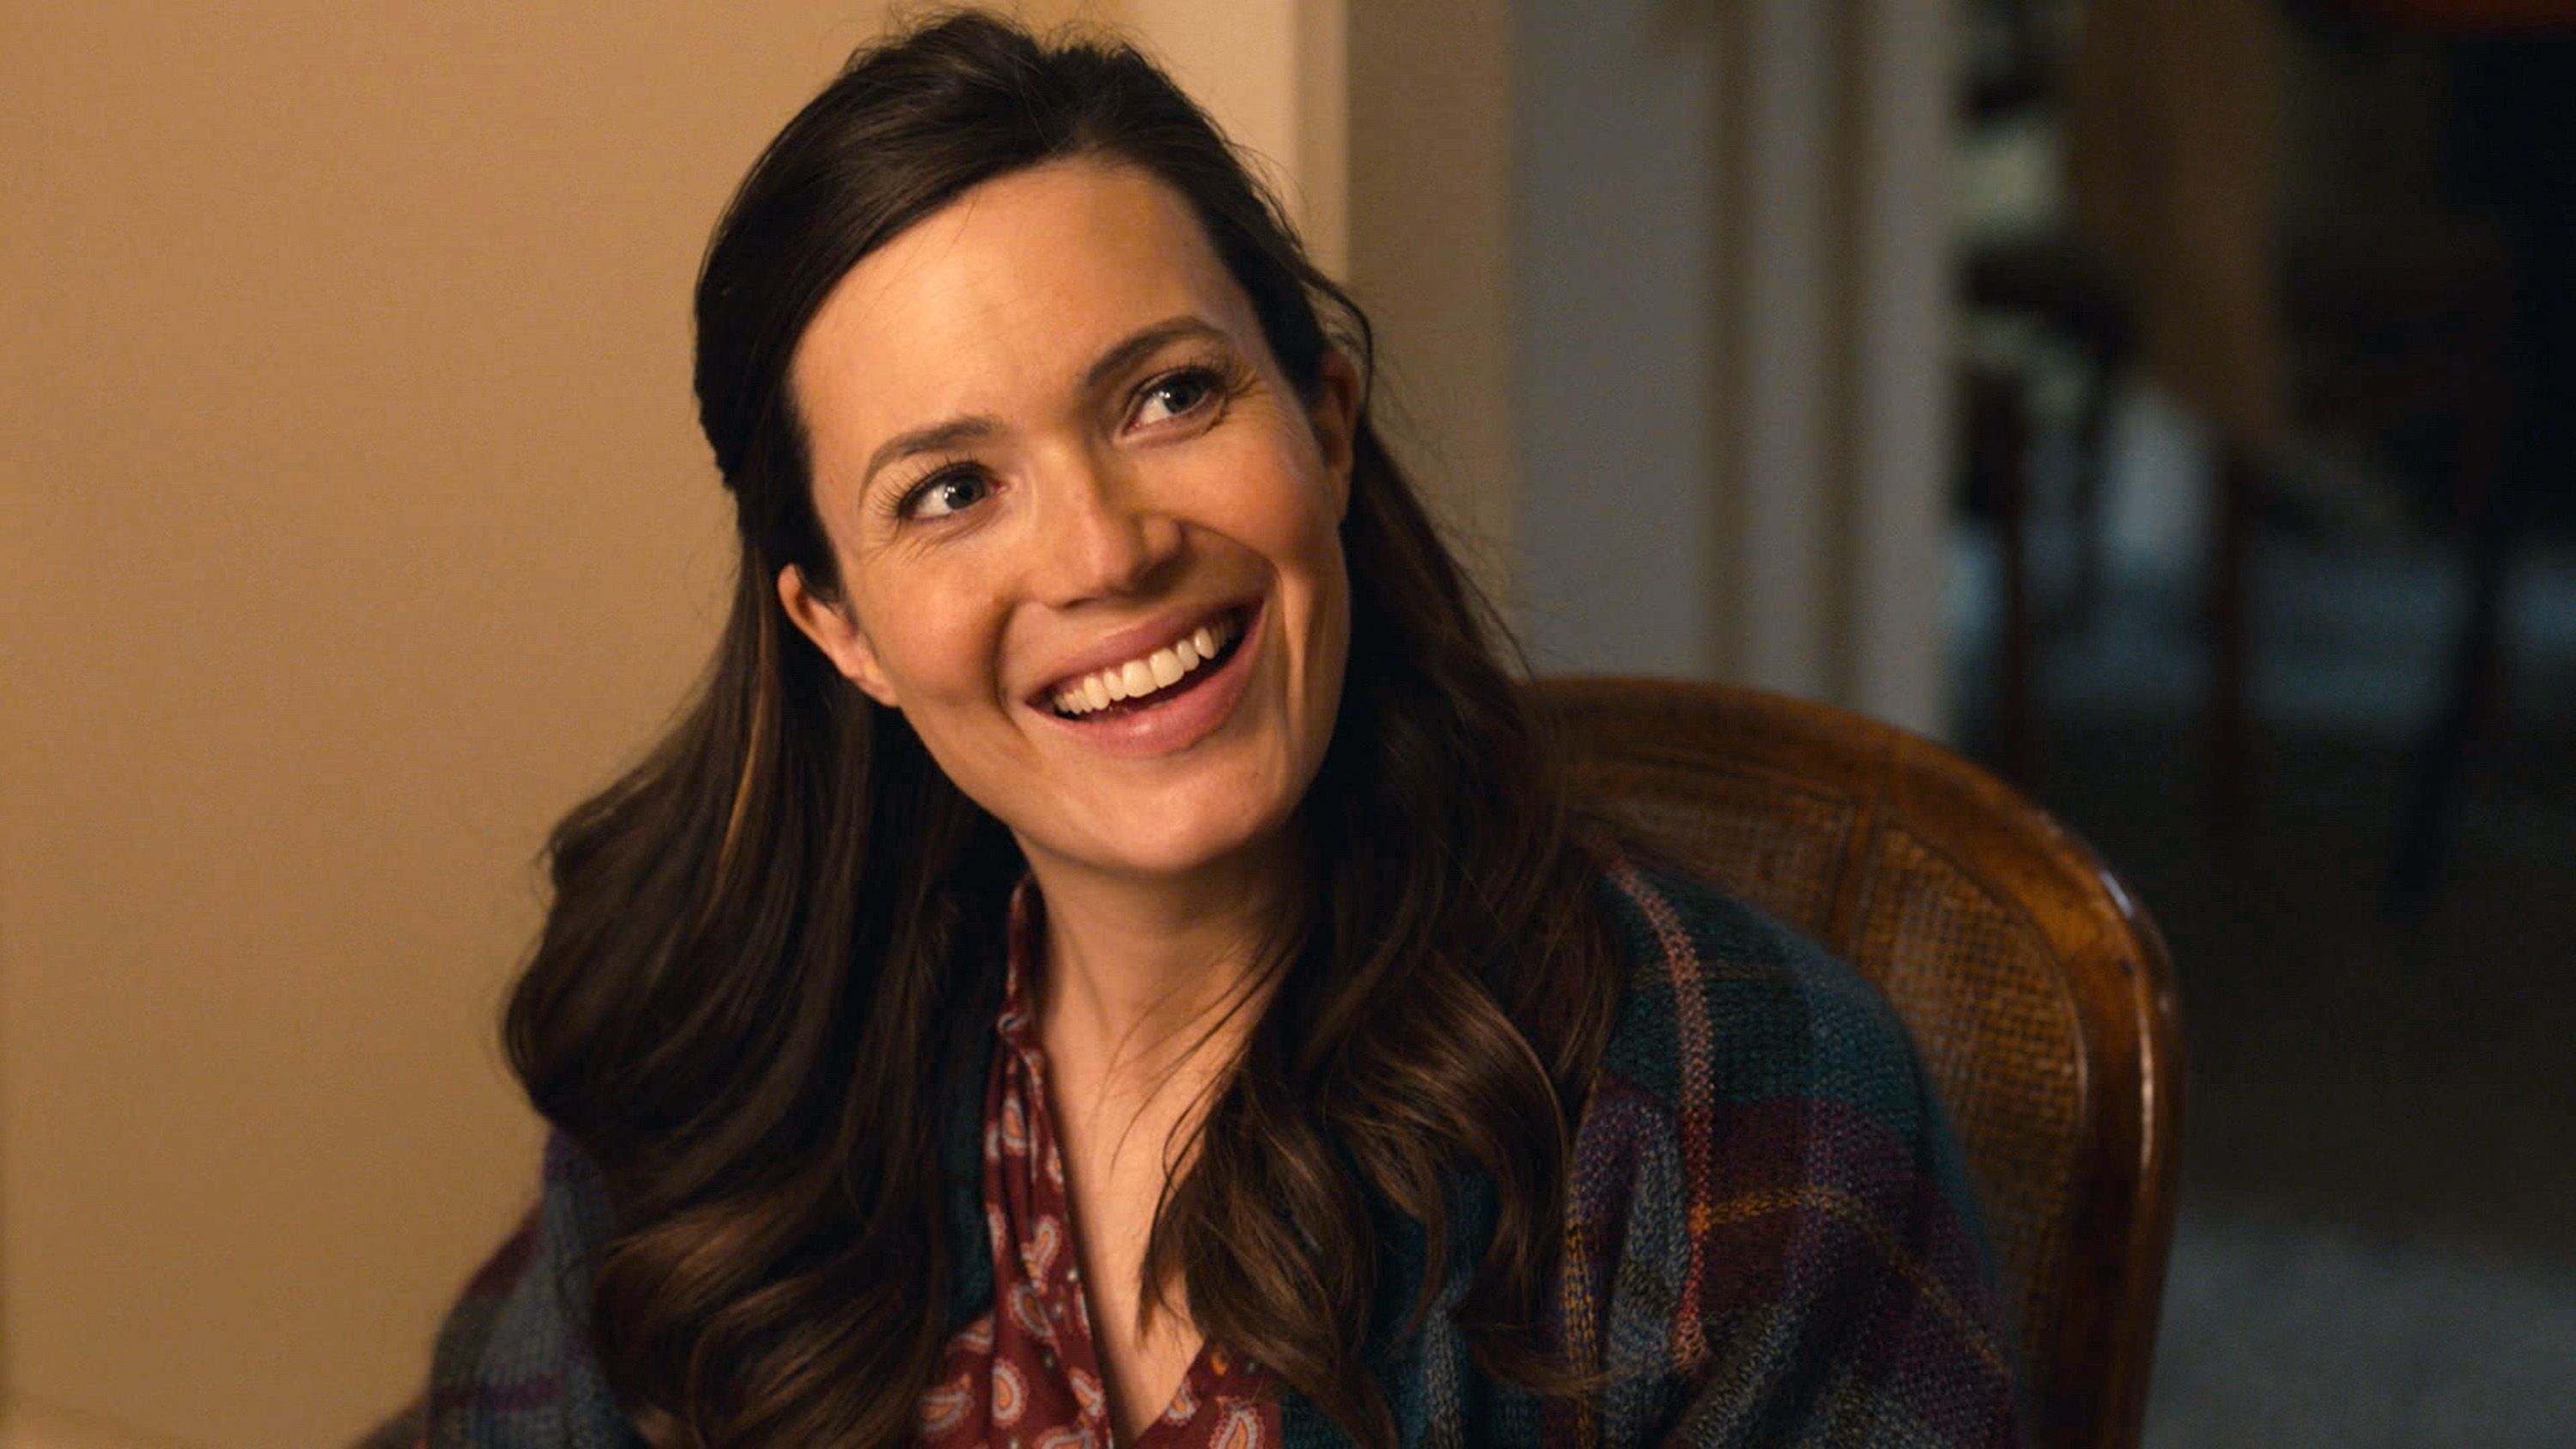 Mandy Moore as Rebecca in THIS IS US -- "I've Got This" Episode 510 on March 11, 2021 | Photo: Getty Images